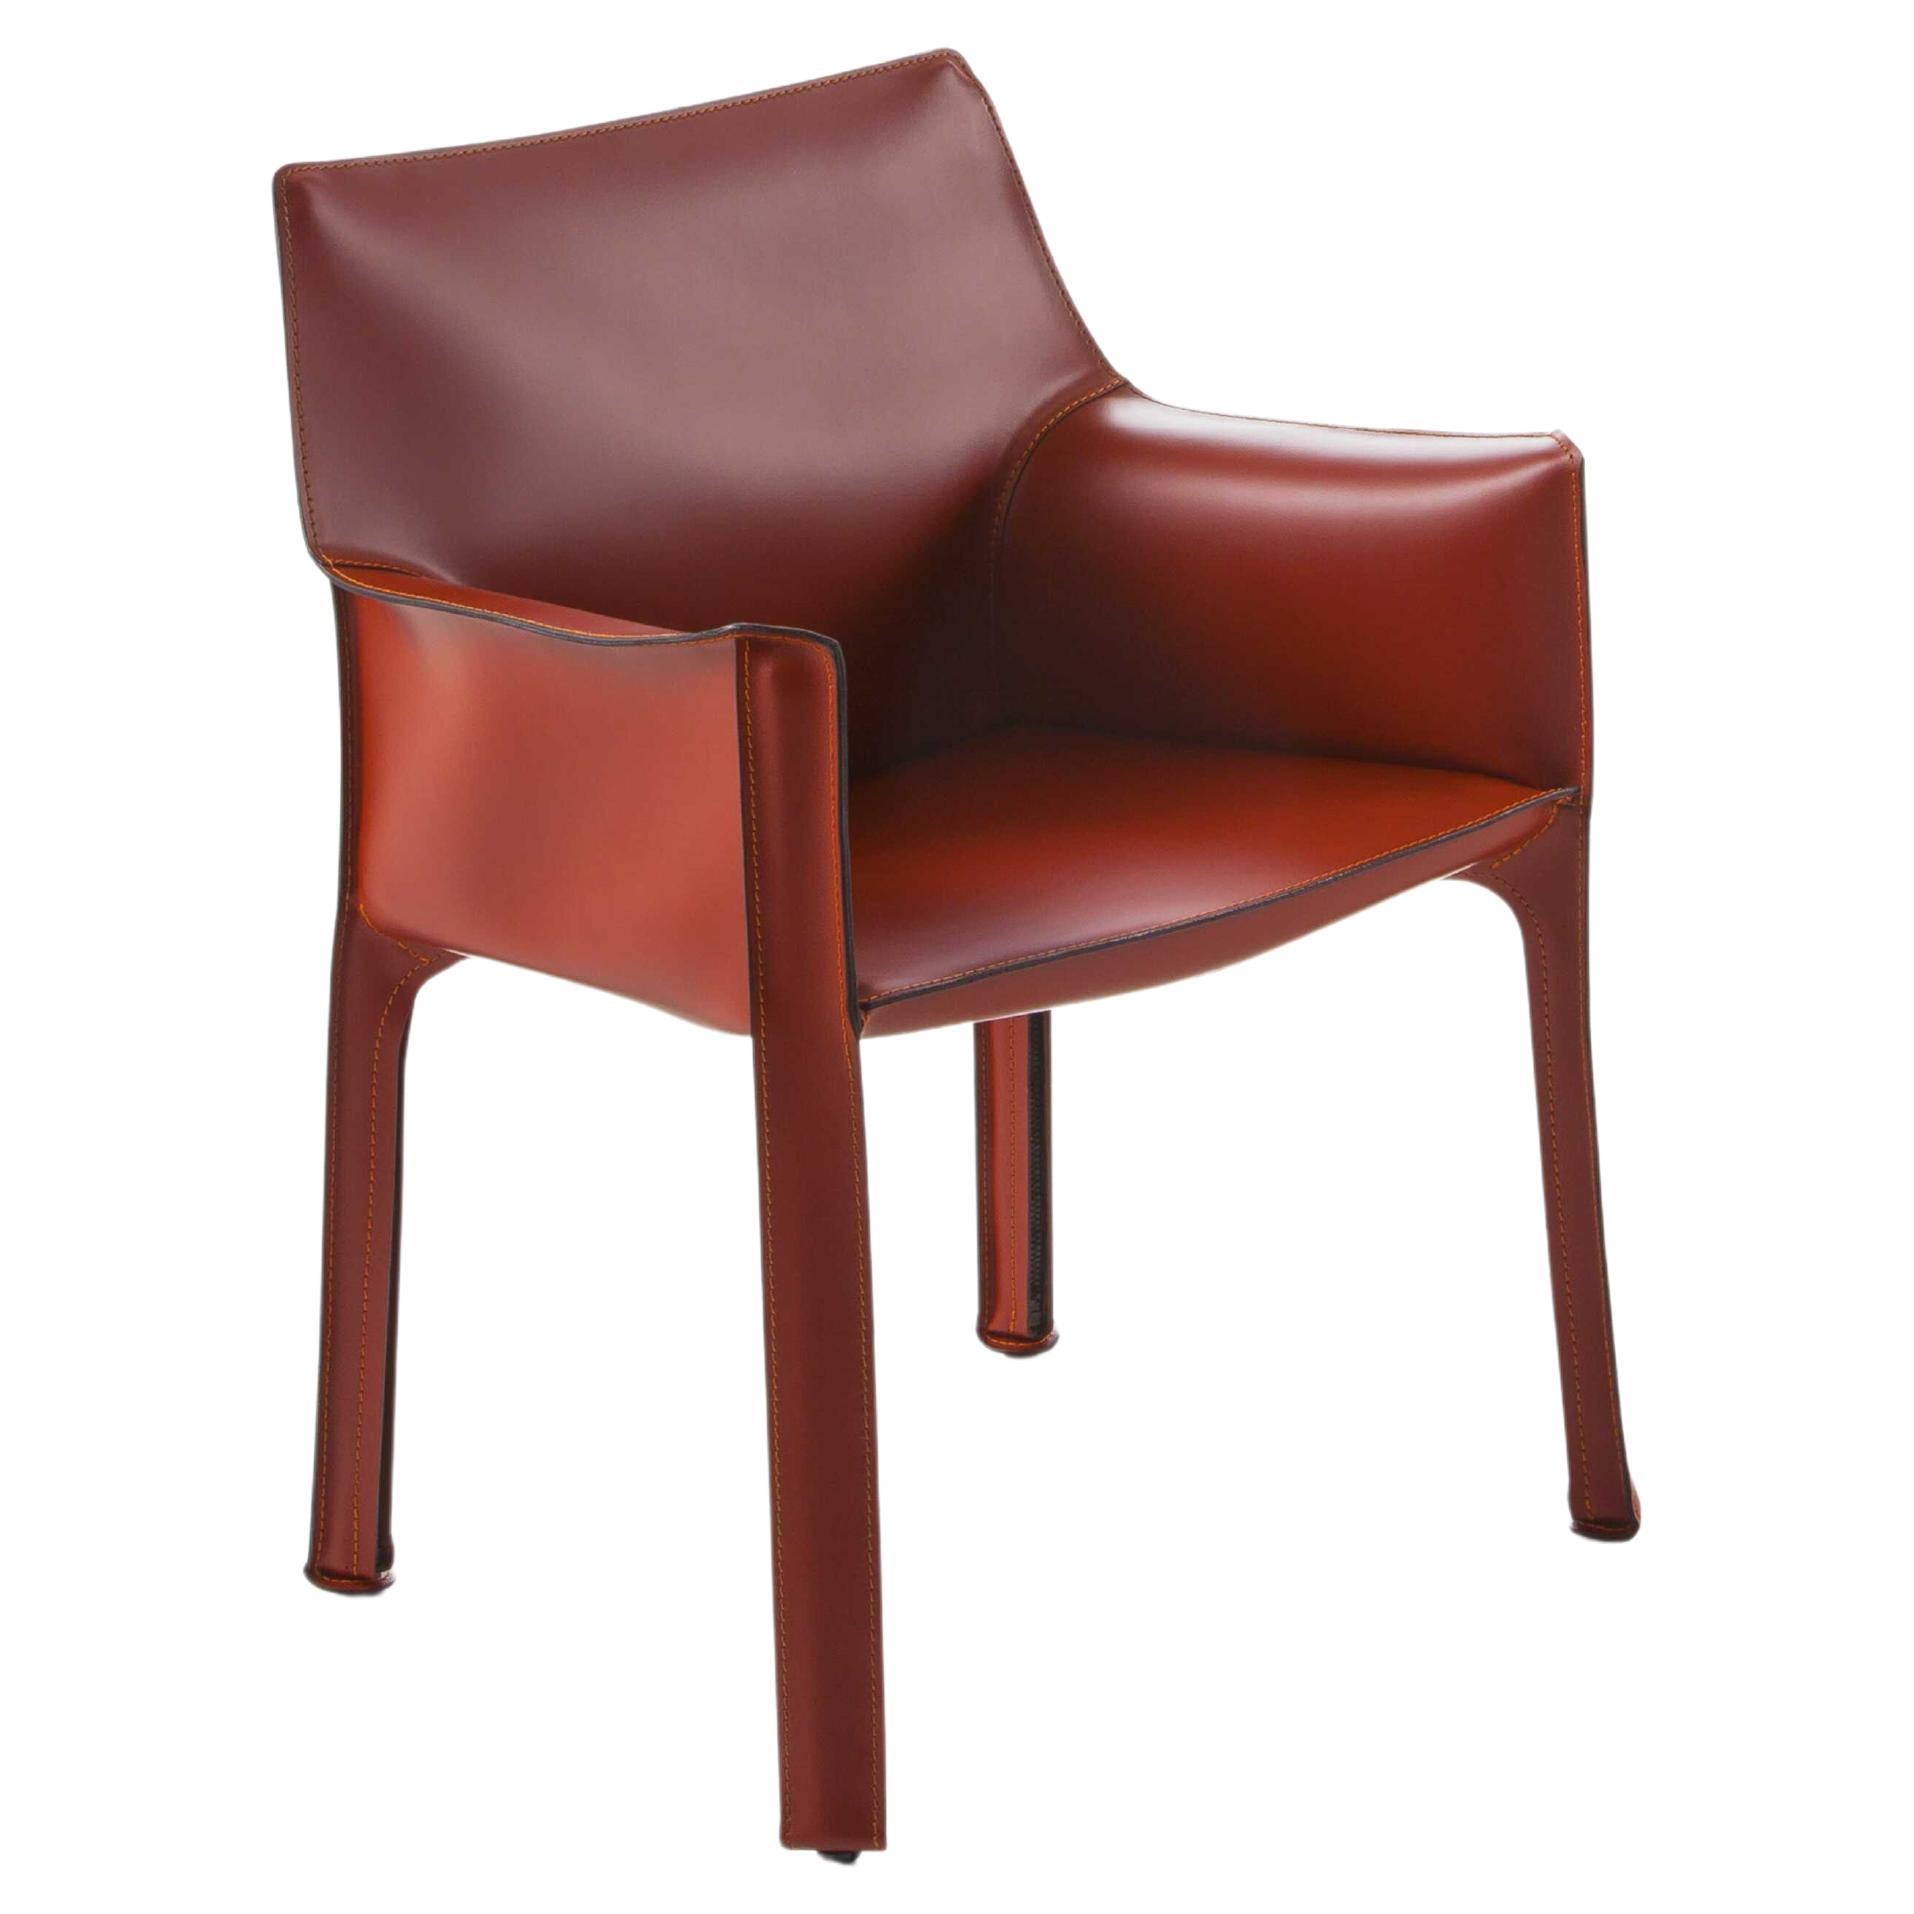 Mario Bellini Cab 413 cowhide leather armchair for Cassina, Italy - new For Sale